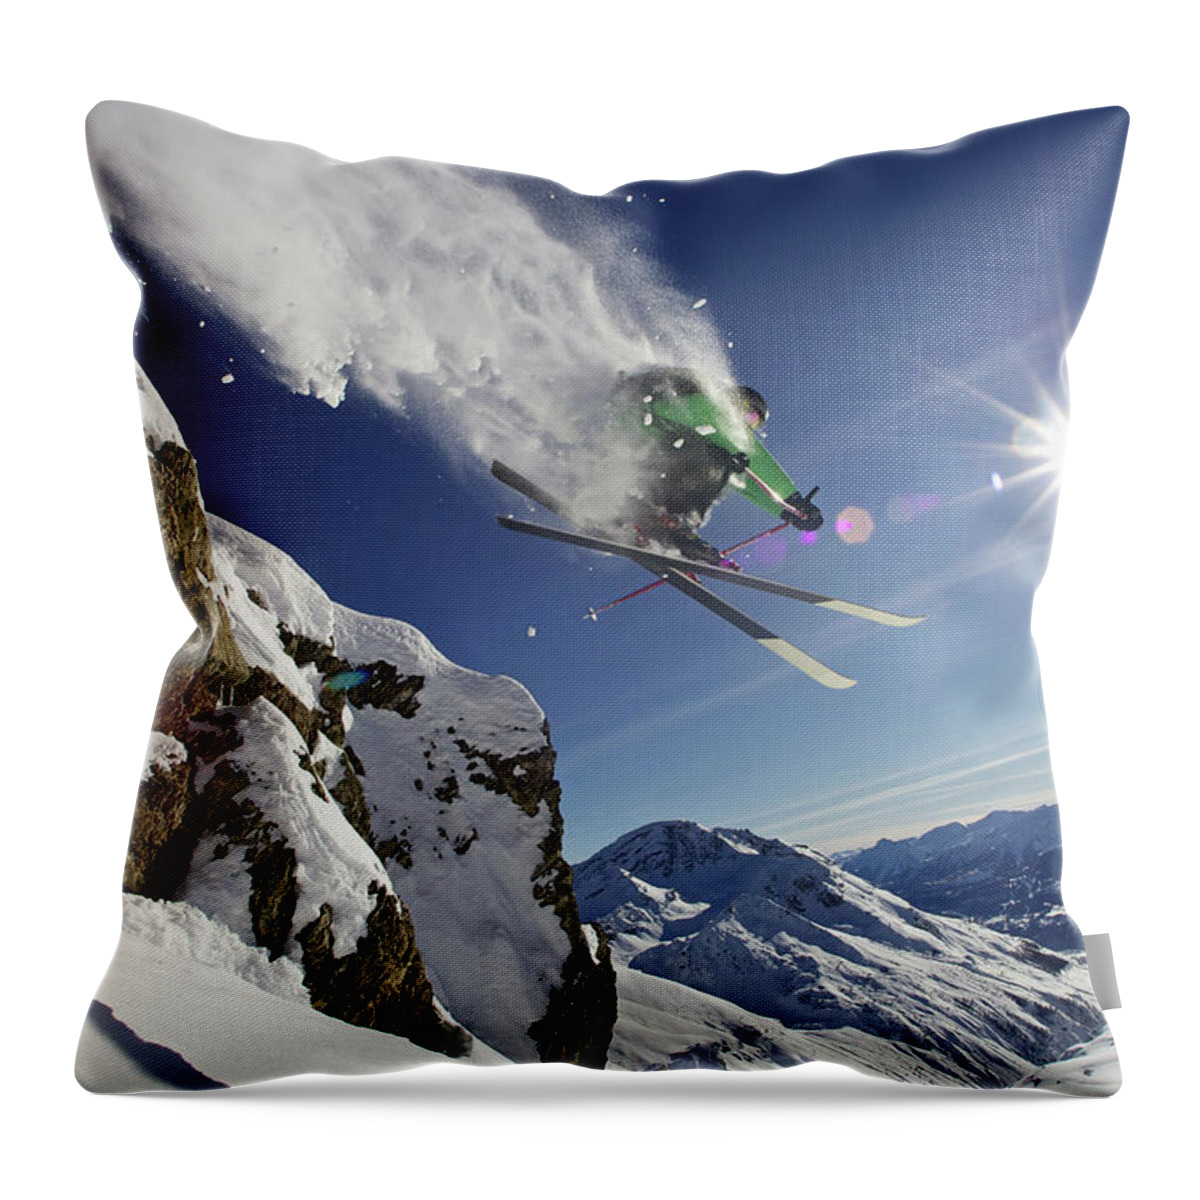 Young Men Throw Pillow featuring the photograph Skier In Midair On Snowy Mountain by Michael Truelove